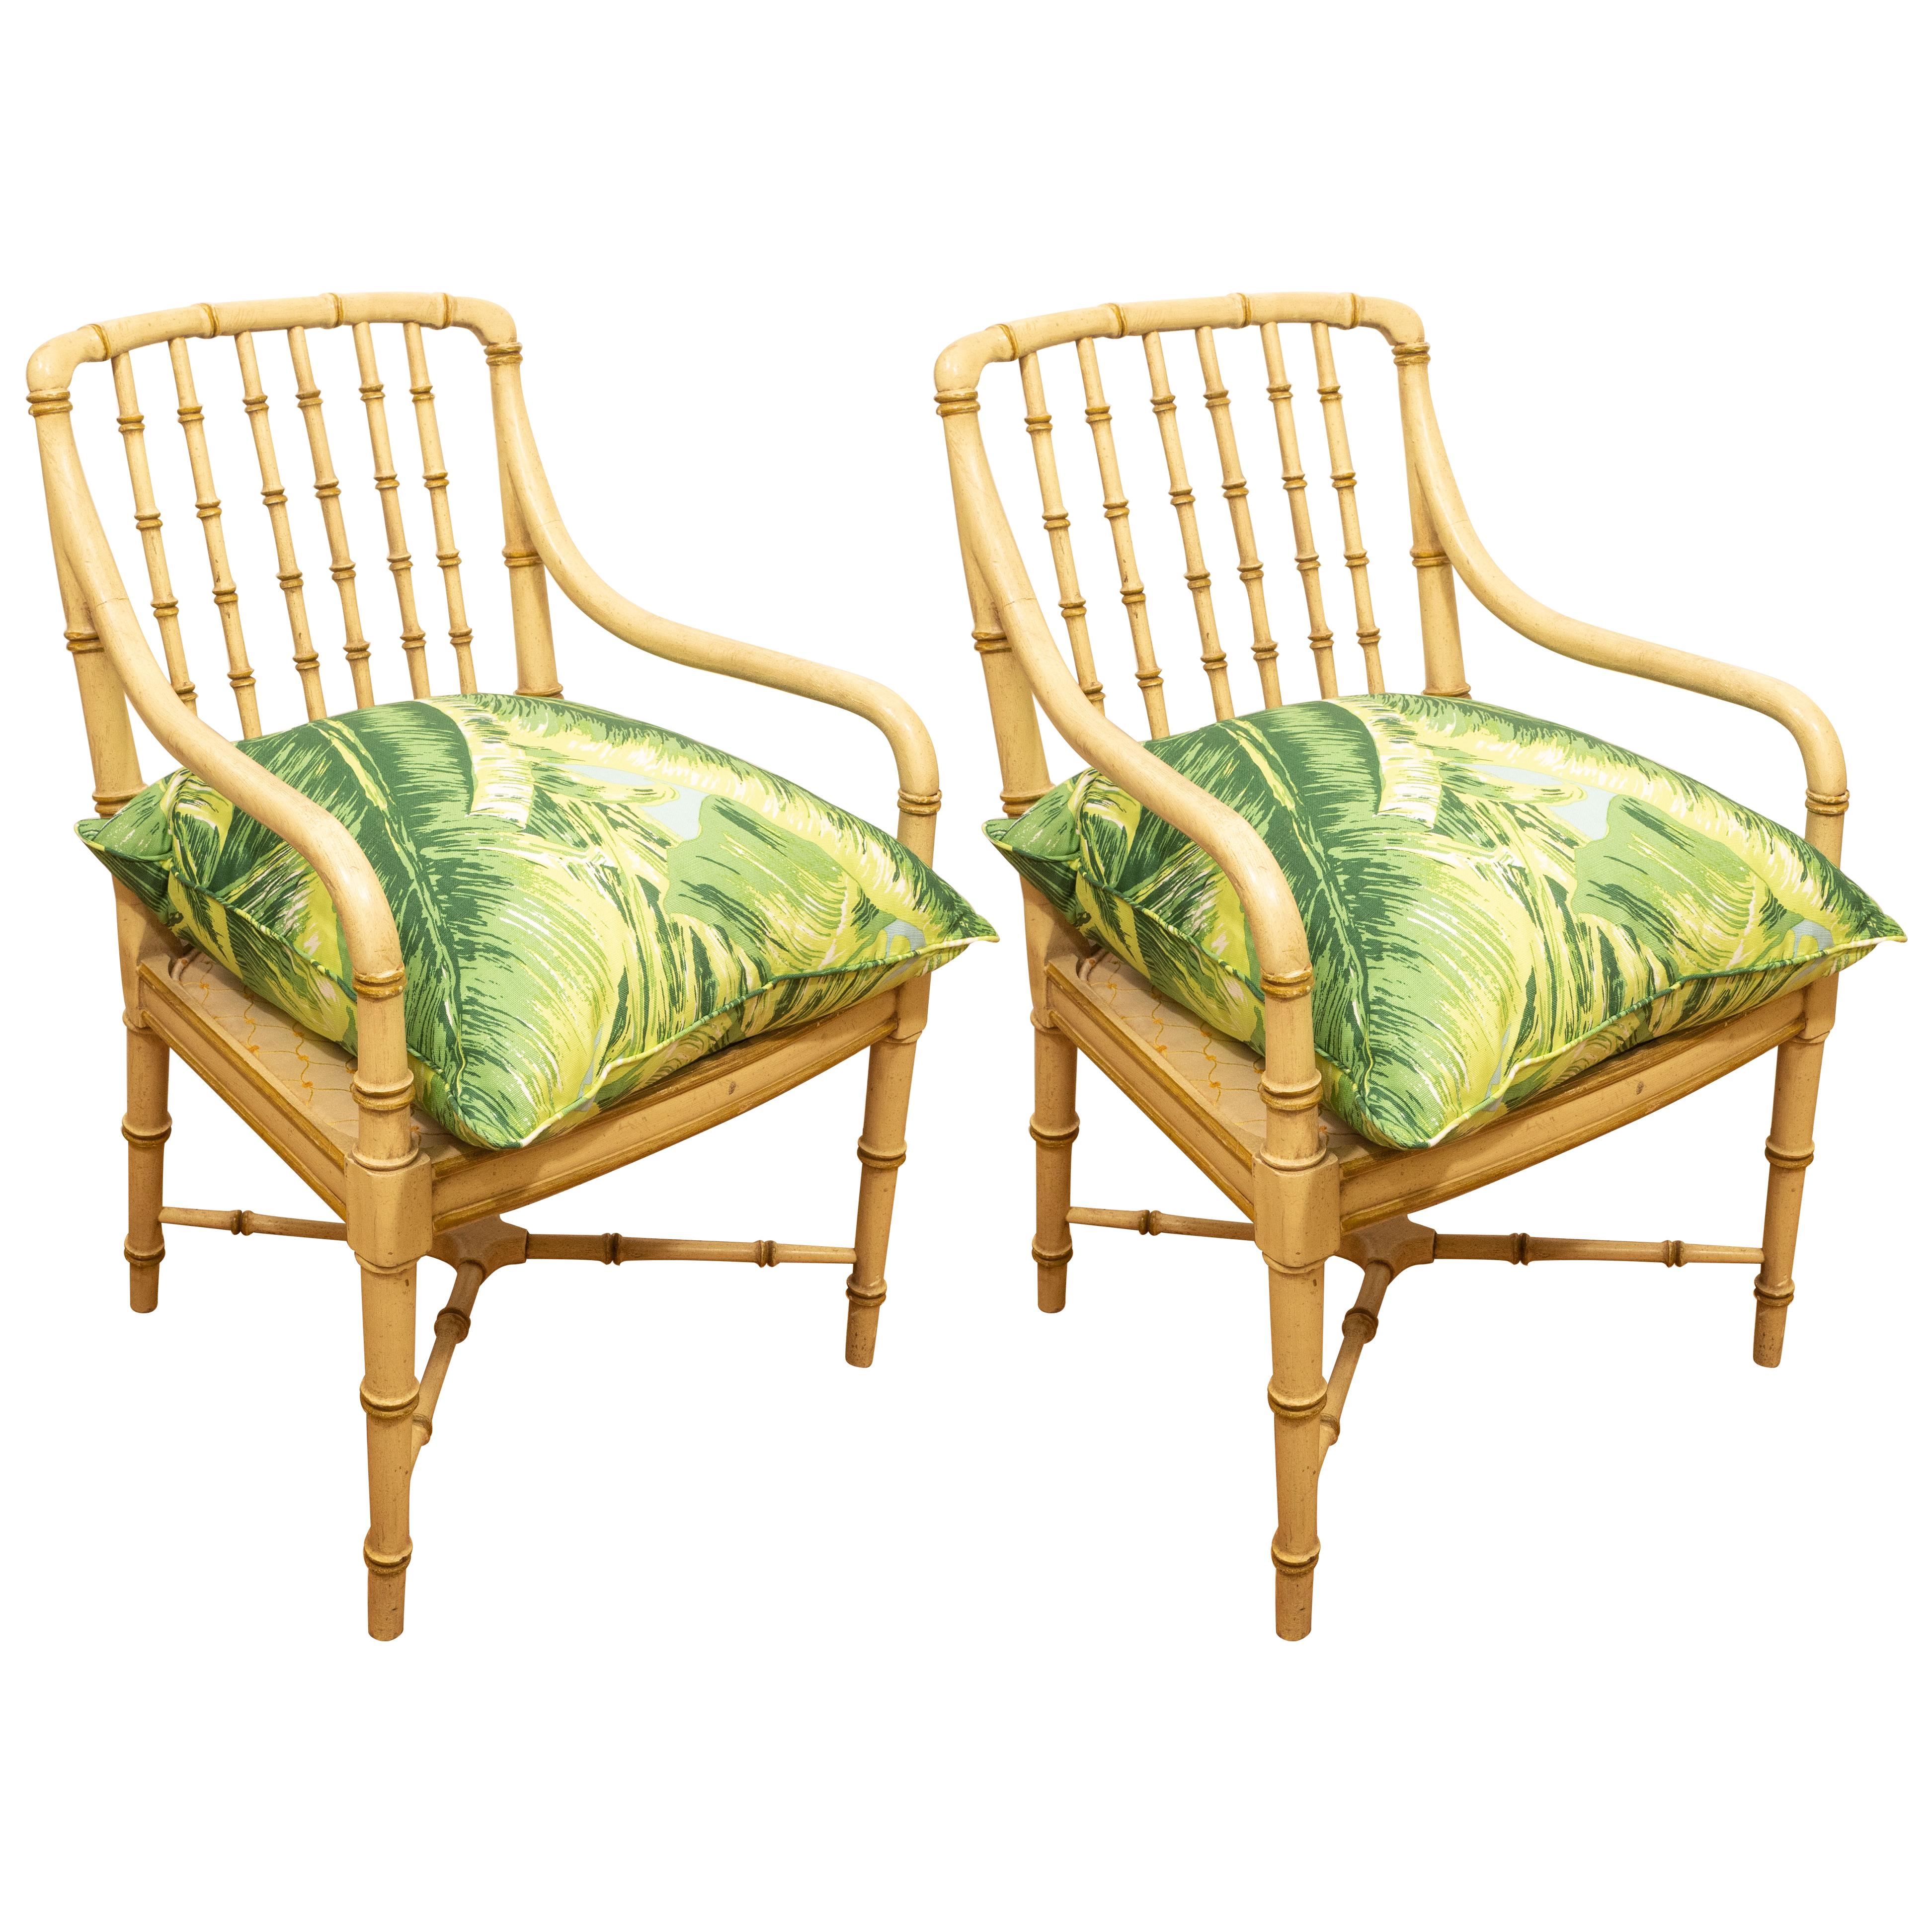 Pair of Green Bamboo Chairs